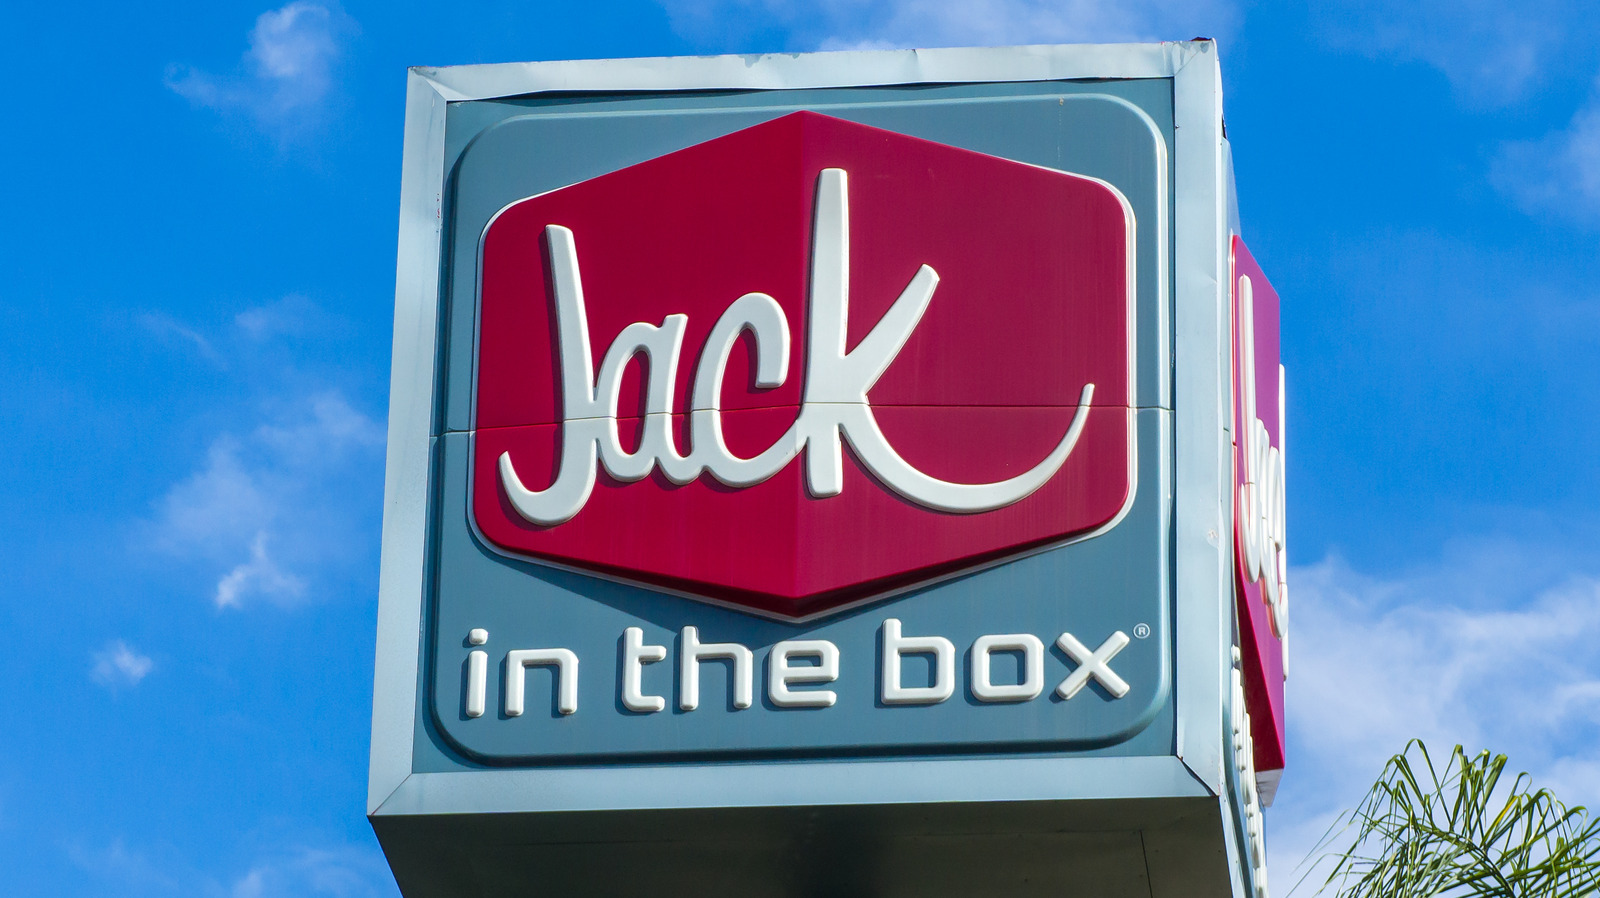 https://www.mashed.com/img/gallery/popular-jack-in-the-box-menu-items-ranked-worst-to-best/l-intro-1626710777.jpg